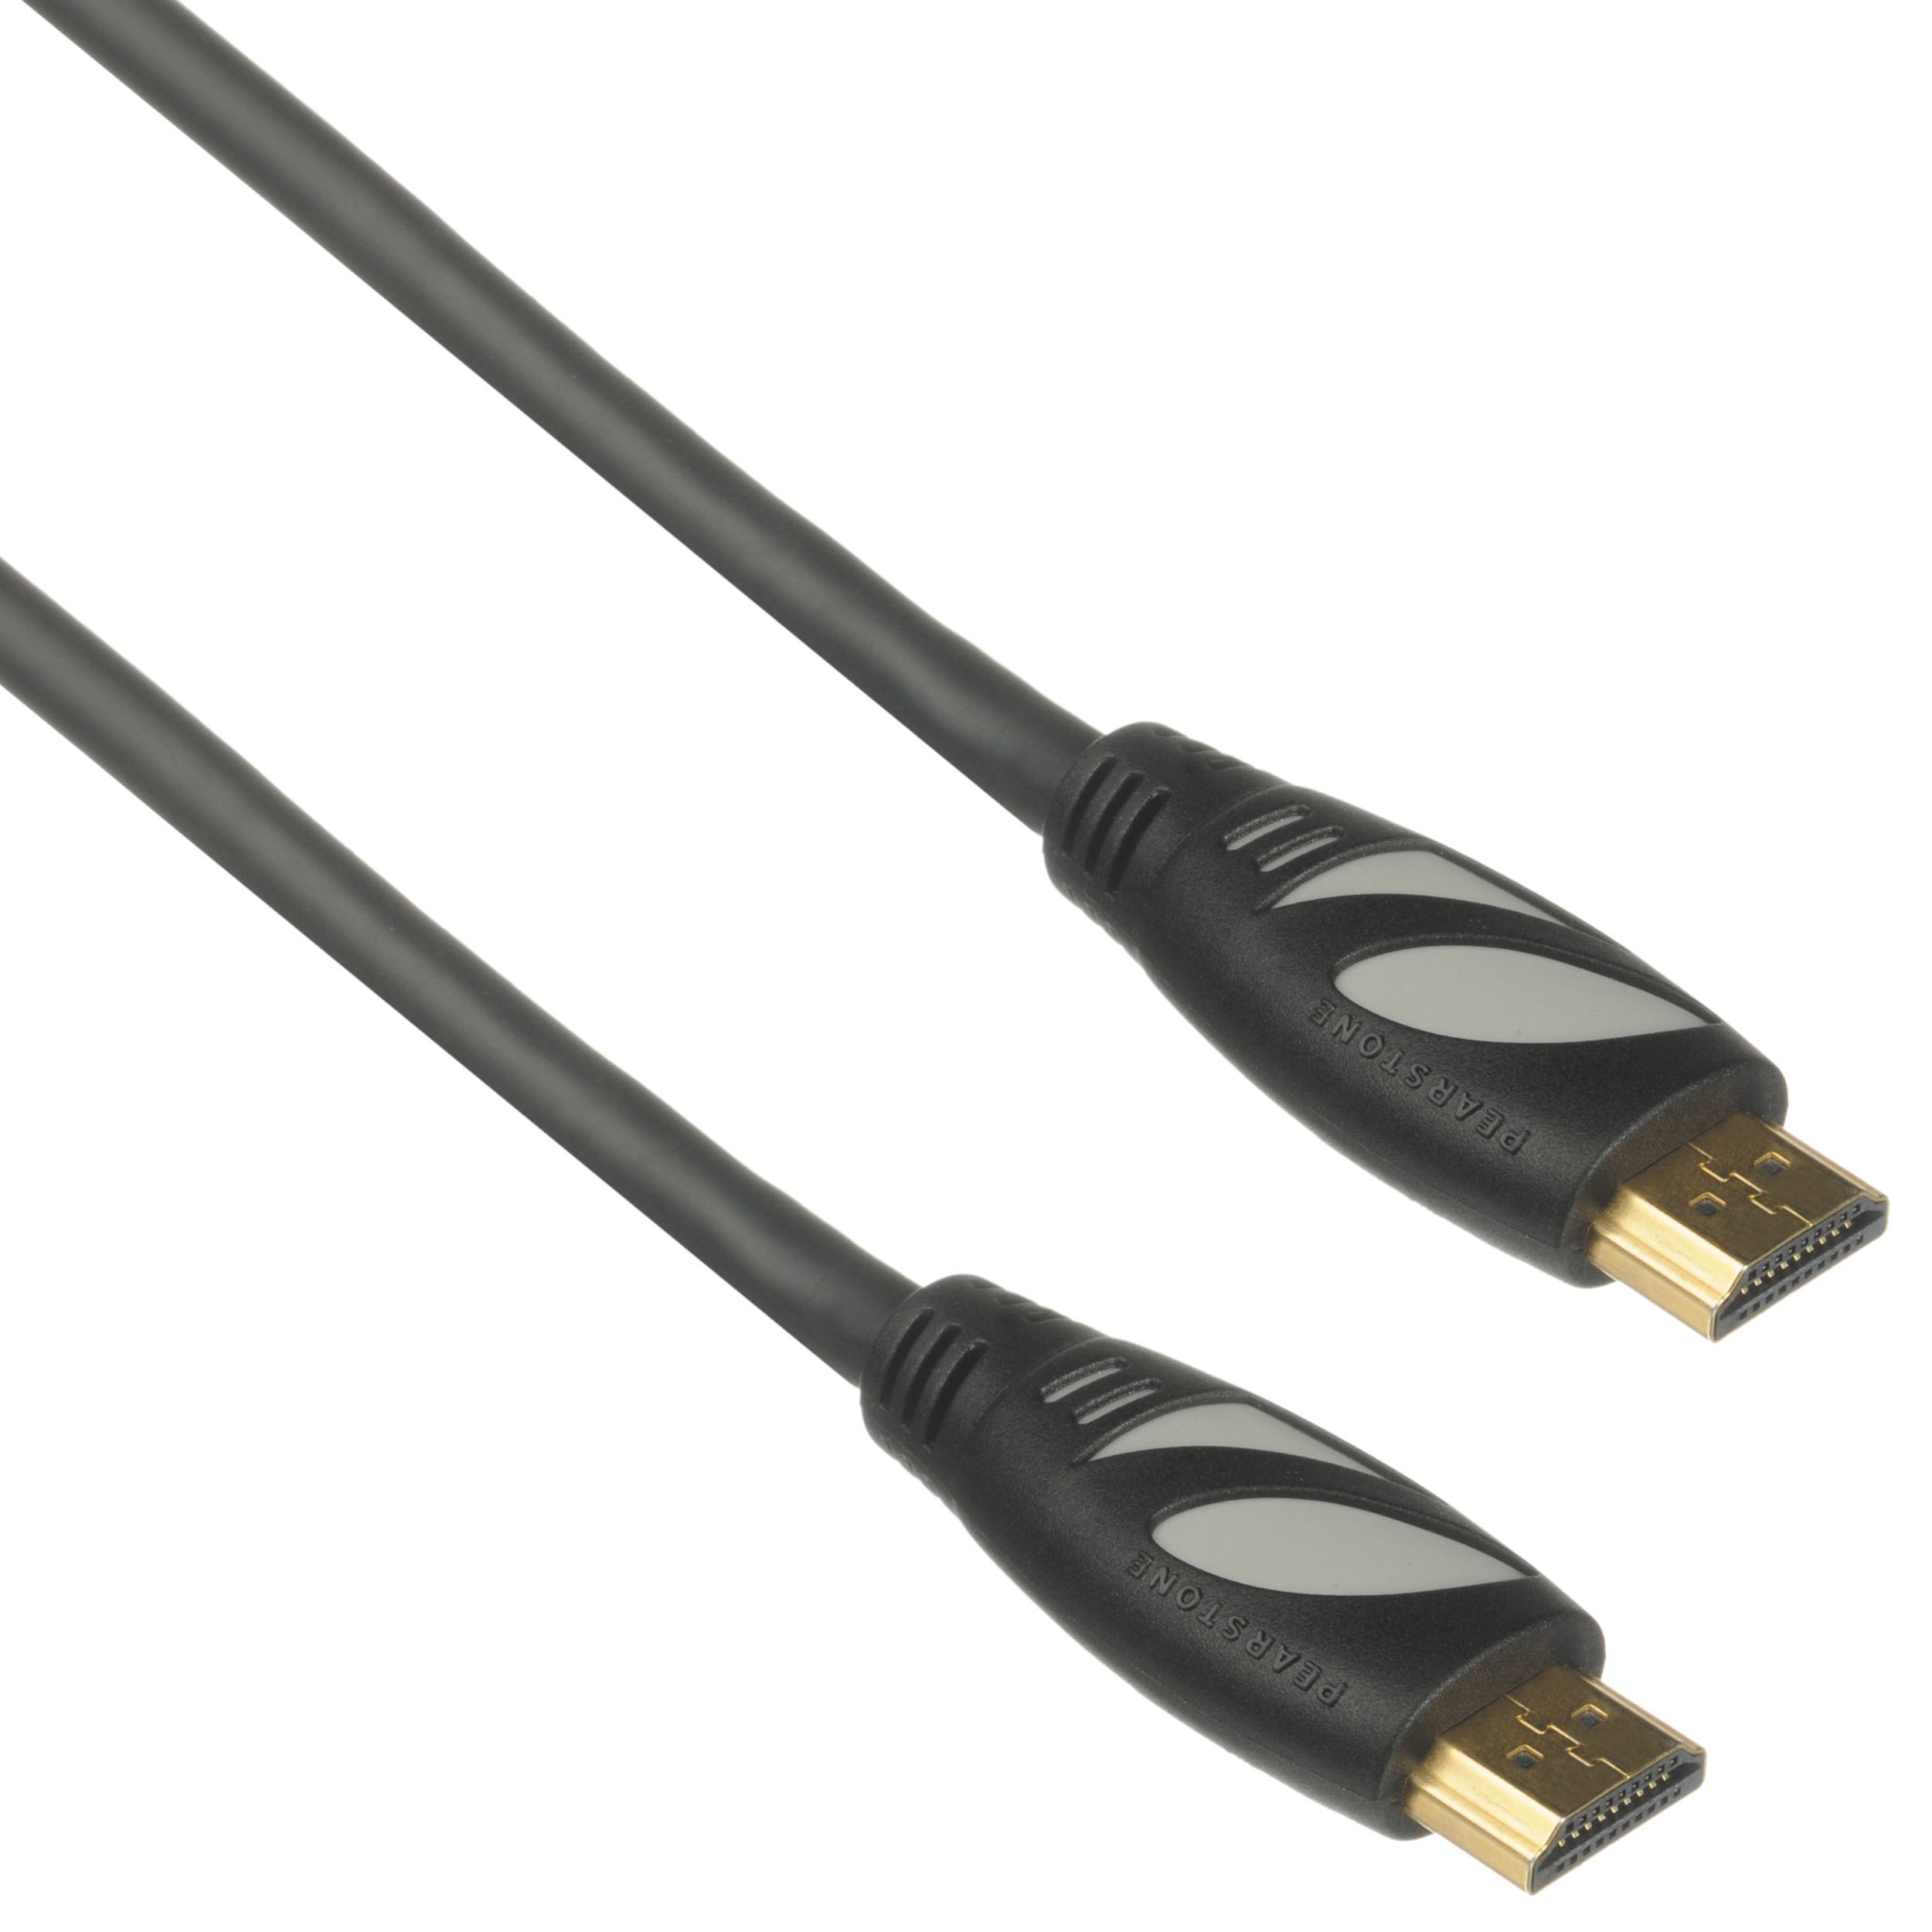 Pearstone HDA-1015 High-Speed HDMI Cable with Ethernet (Black, 1.5')